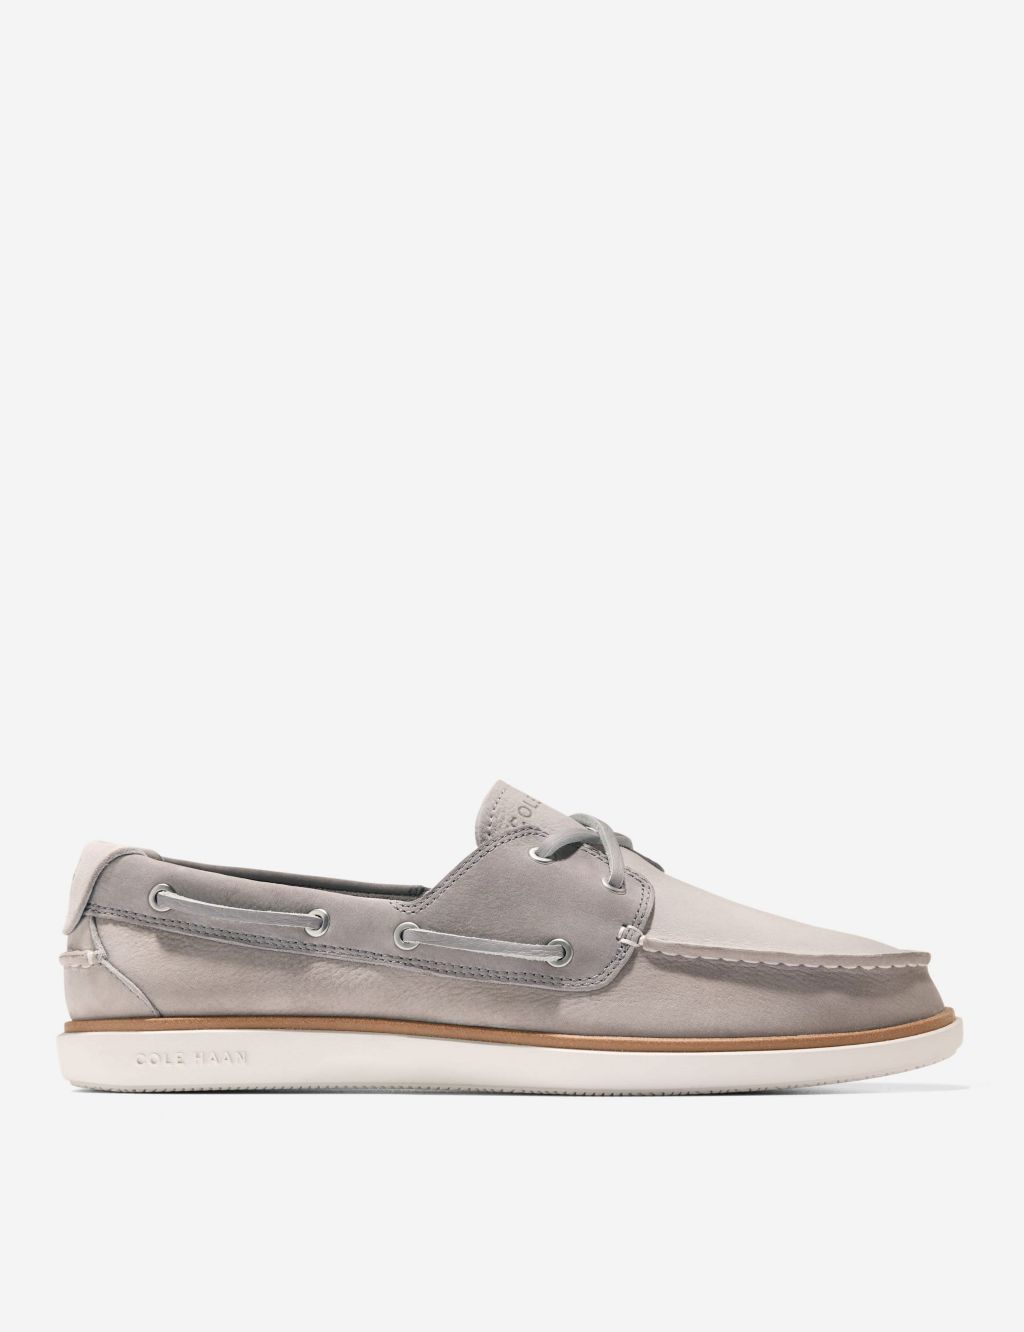 Leather Slip-On Boat Shoes 3 of 6